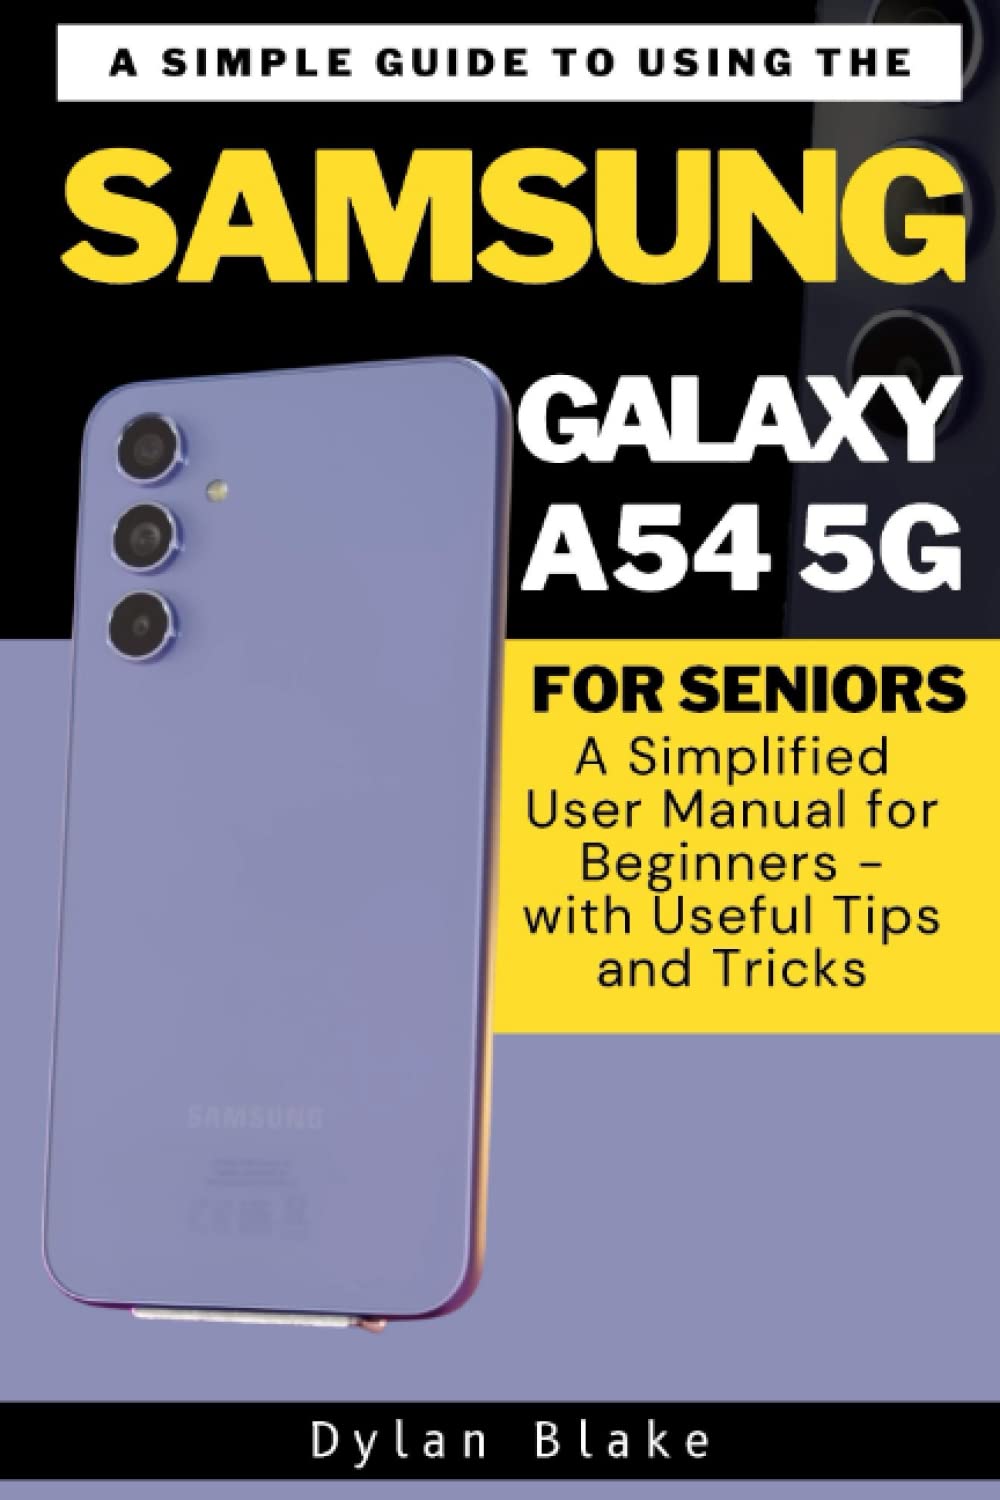 A Simple Guide to Using the Samsung Galaxy A54 5G for Seniors: A Simplified User Manual for Beginners - with Useful Tips and Tricks (A Simple Guide Series)